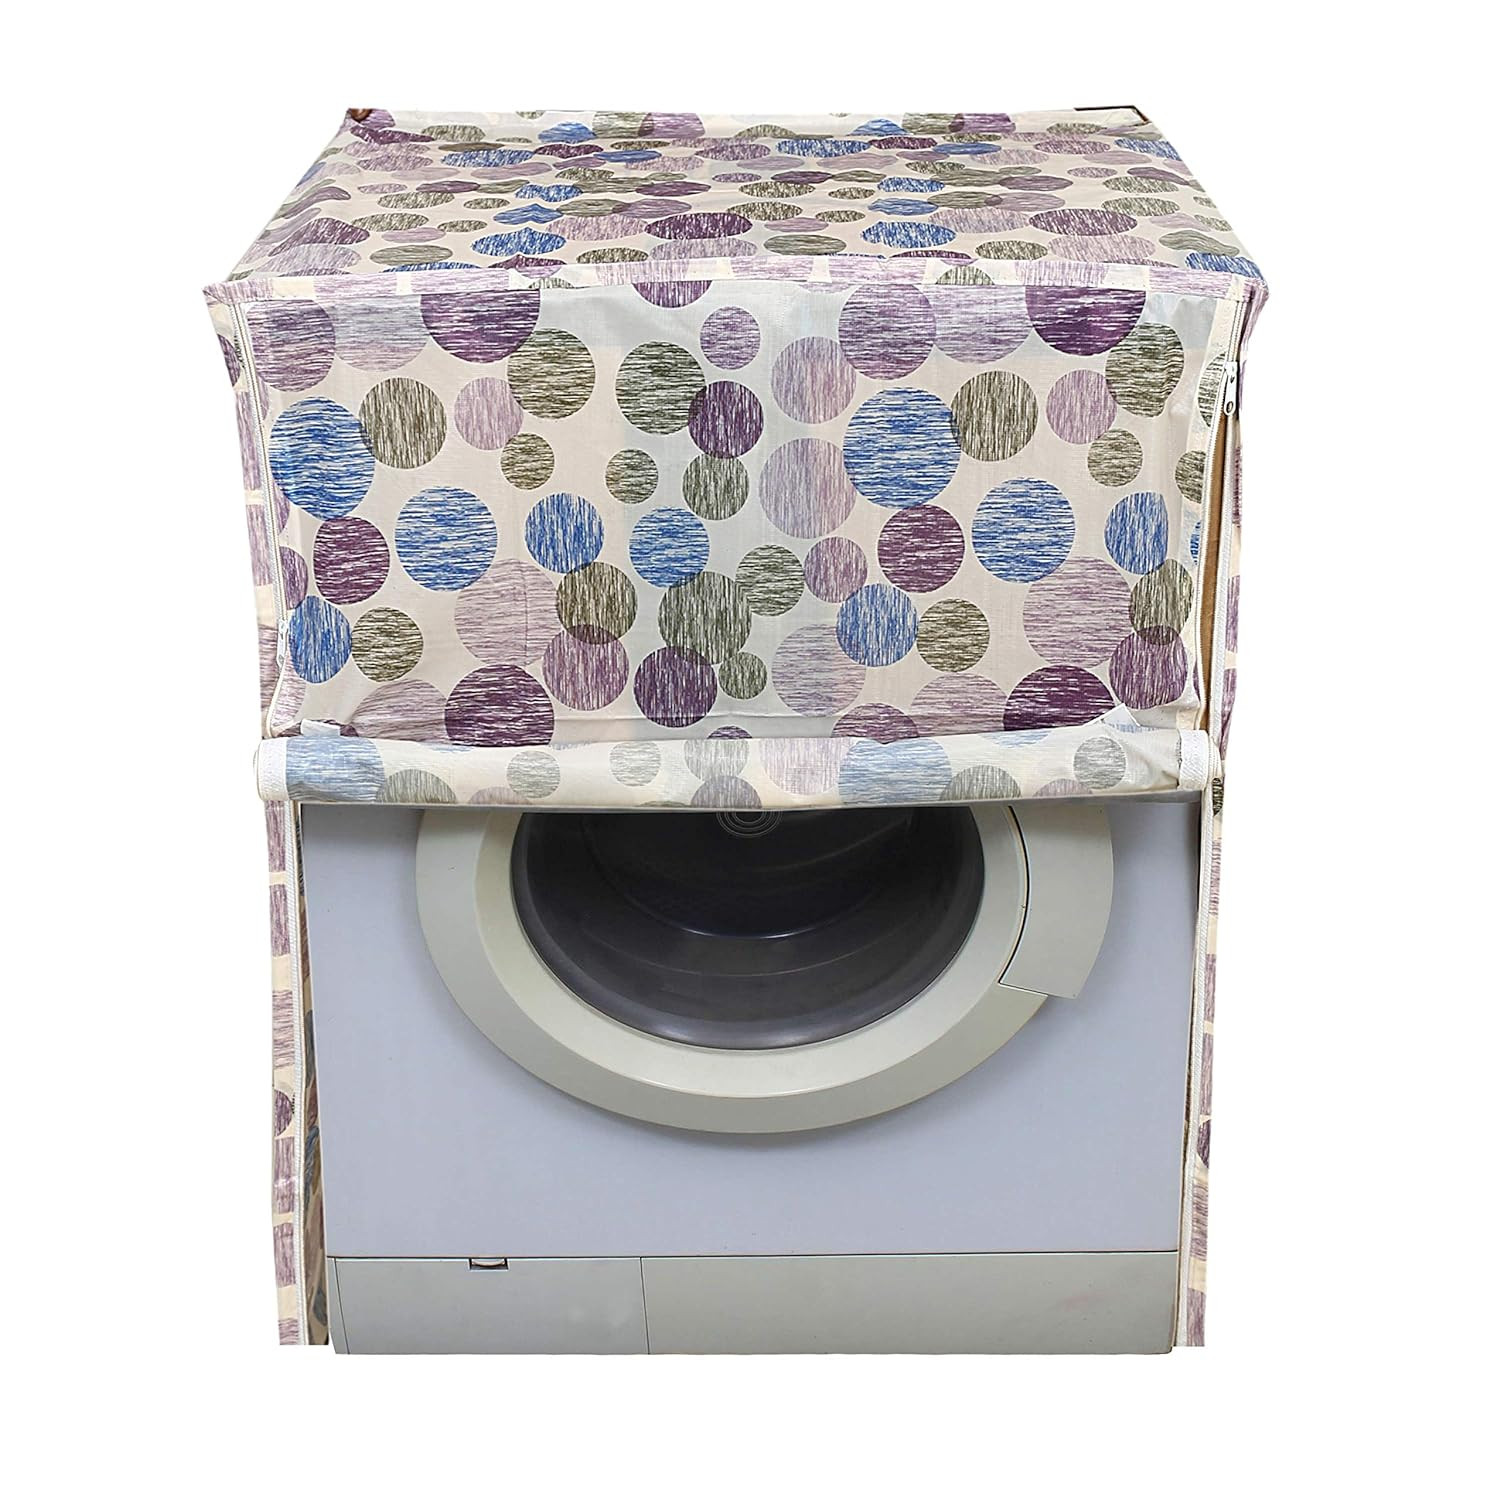 Kuber Industries Circle Design PVC Front Load Fully Automatic Washing Machine Cover - Multicolour